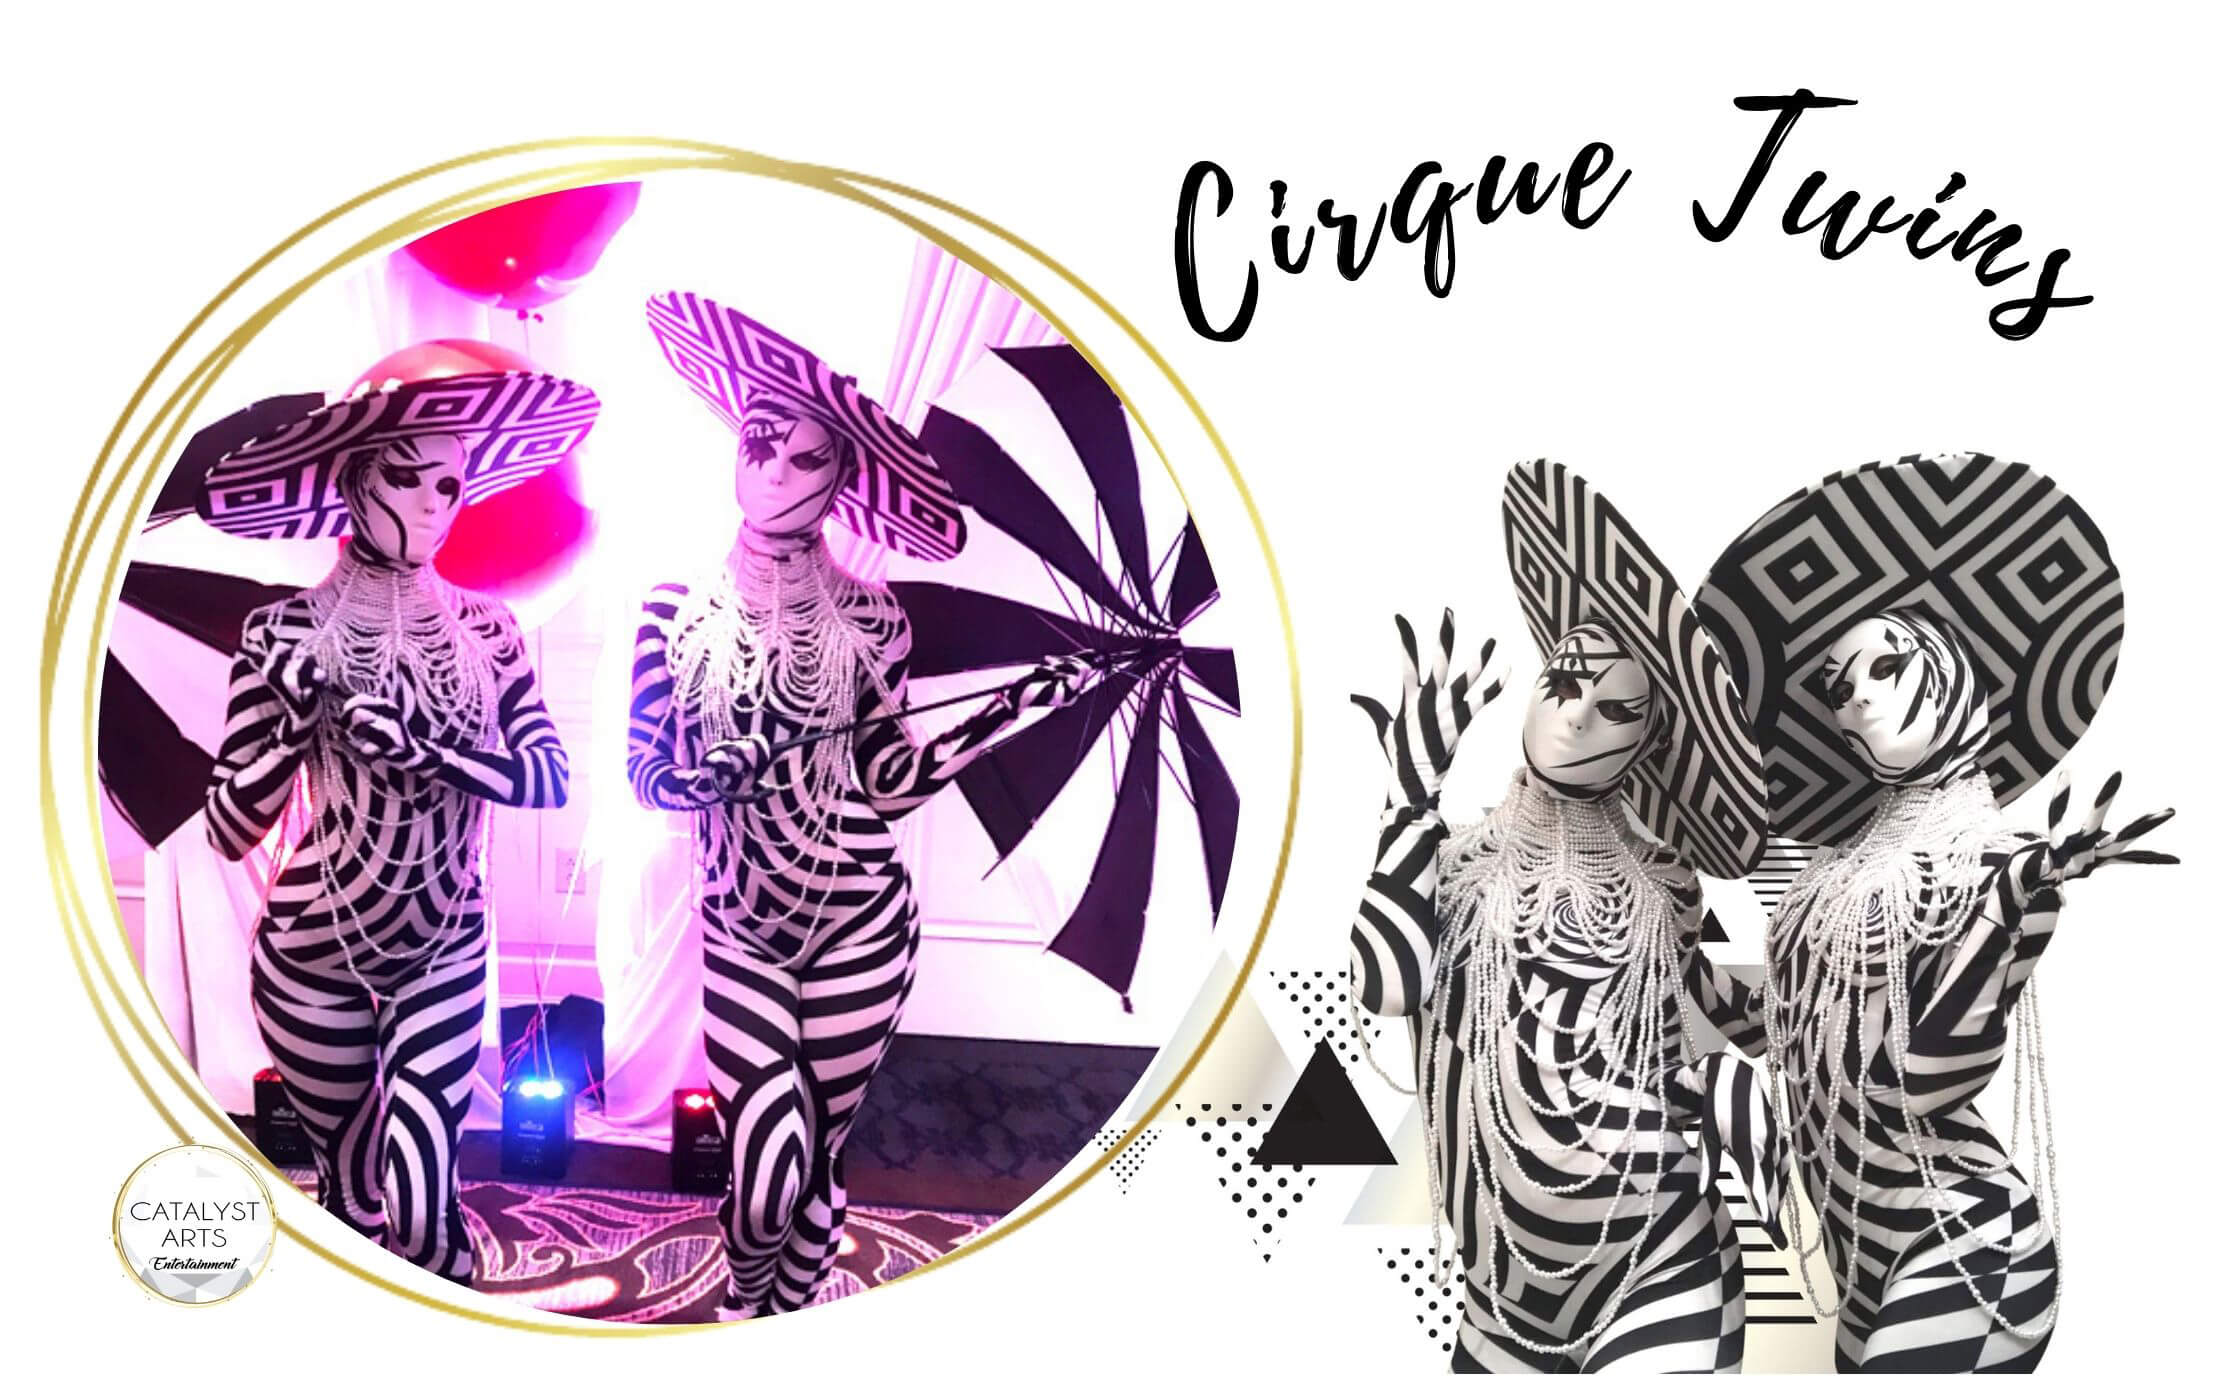 Mesmerizing Cirque Twins- bubble costumed performers by Catalyst Arts California